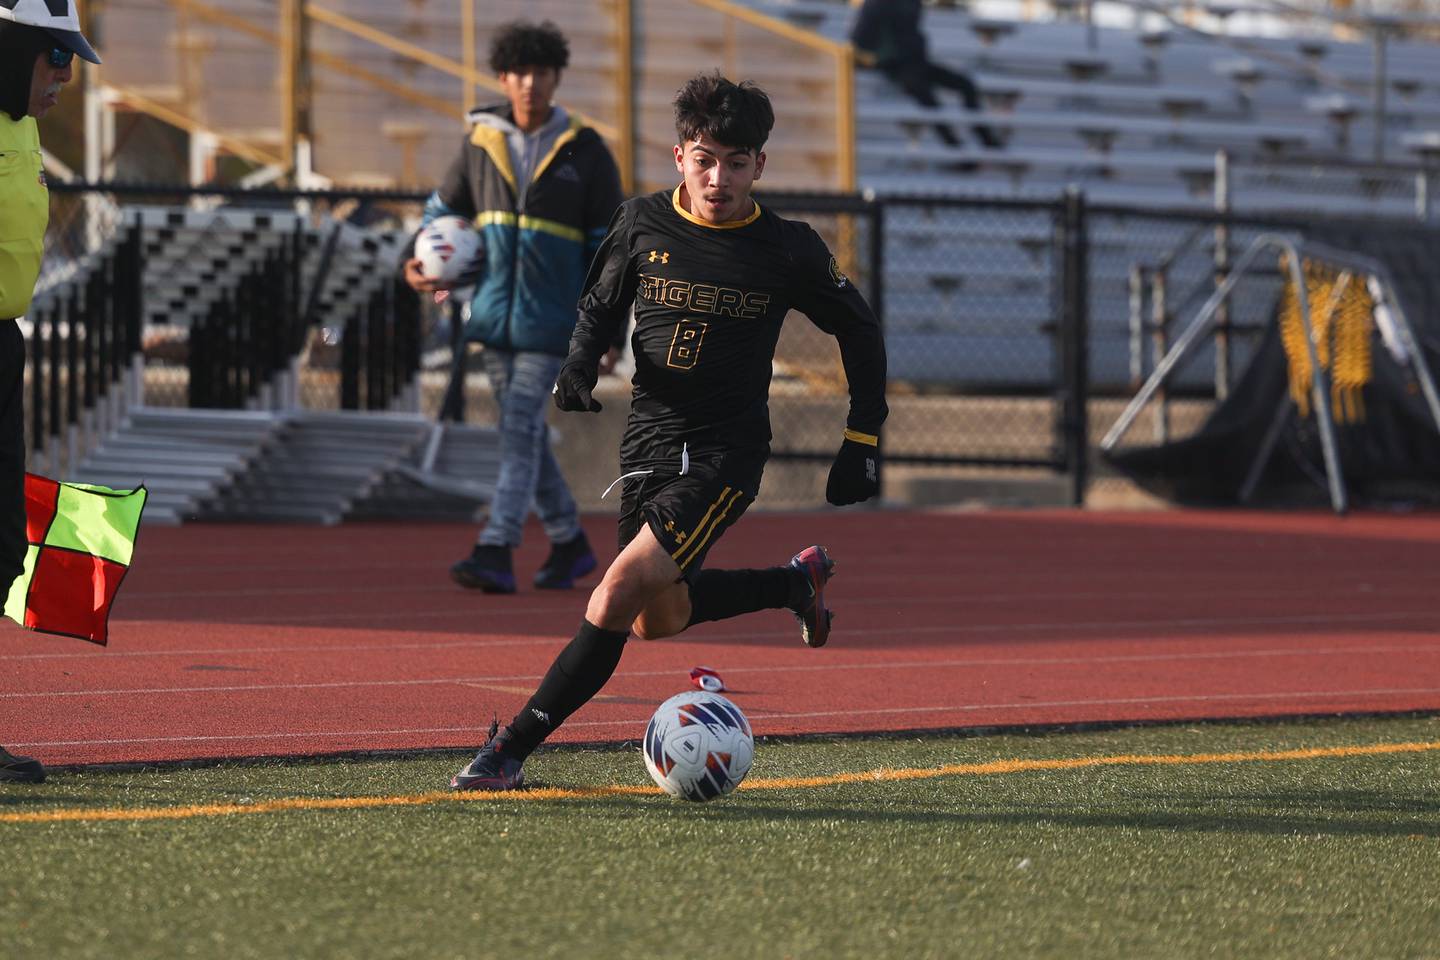 Joliet West’s Adrian Maldonado works the ball along the sidelines against East Moline United in the Class 3A Joliet West Regional semifinal on Tuesday.